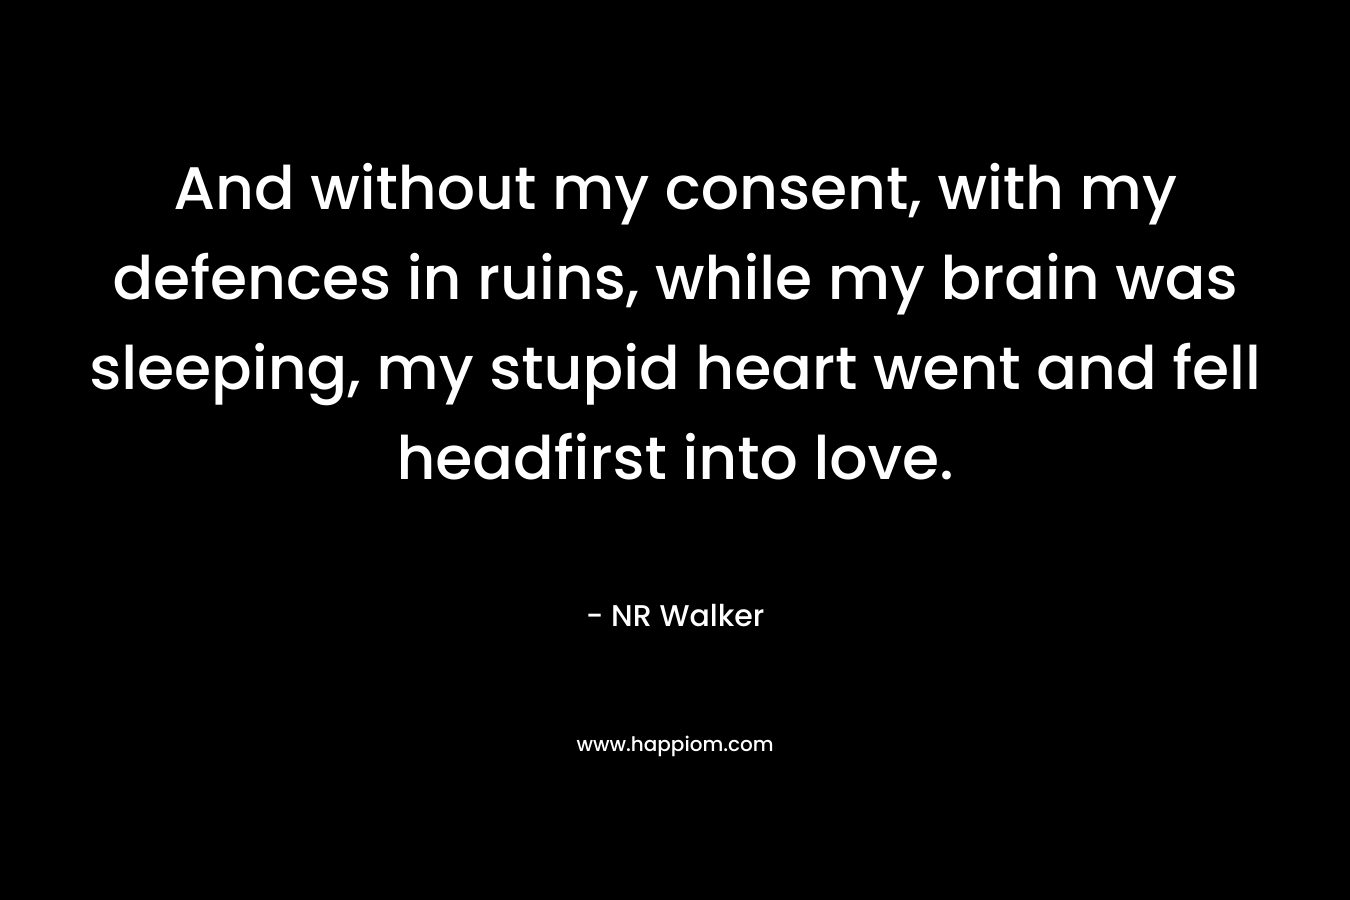 And without my consent, with my defences in ruins, while my brain was sleeping, my stupid heart went and fell headfirst into love. – NR Walker